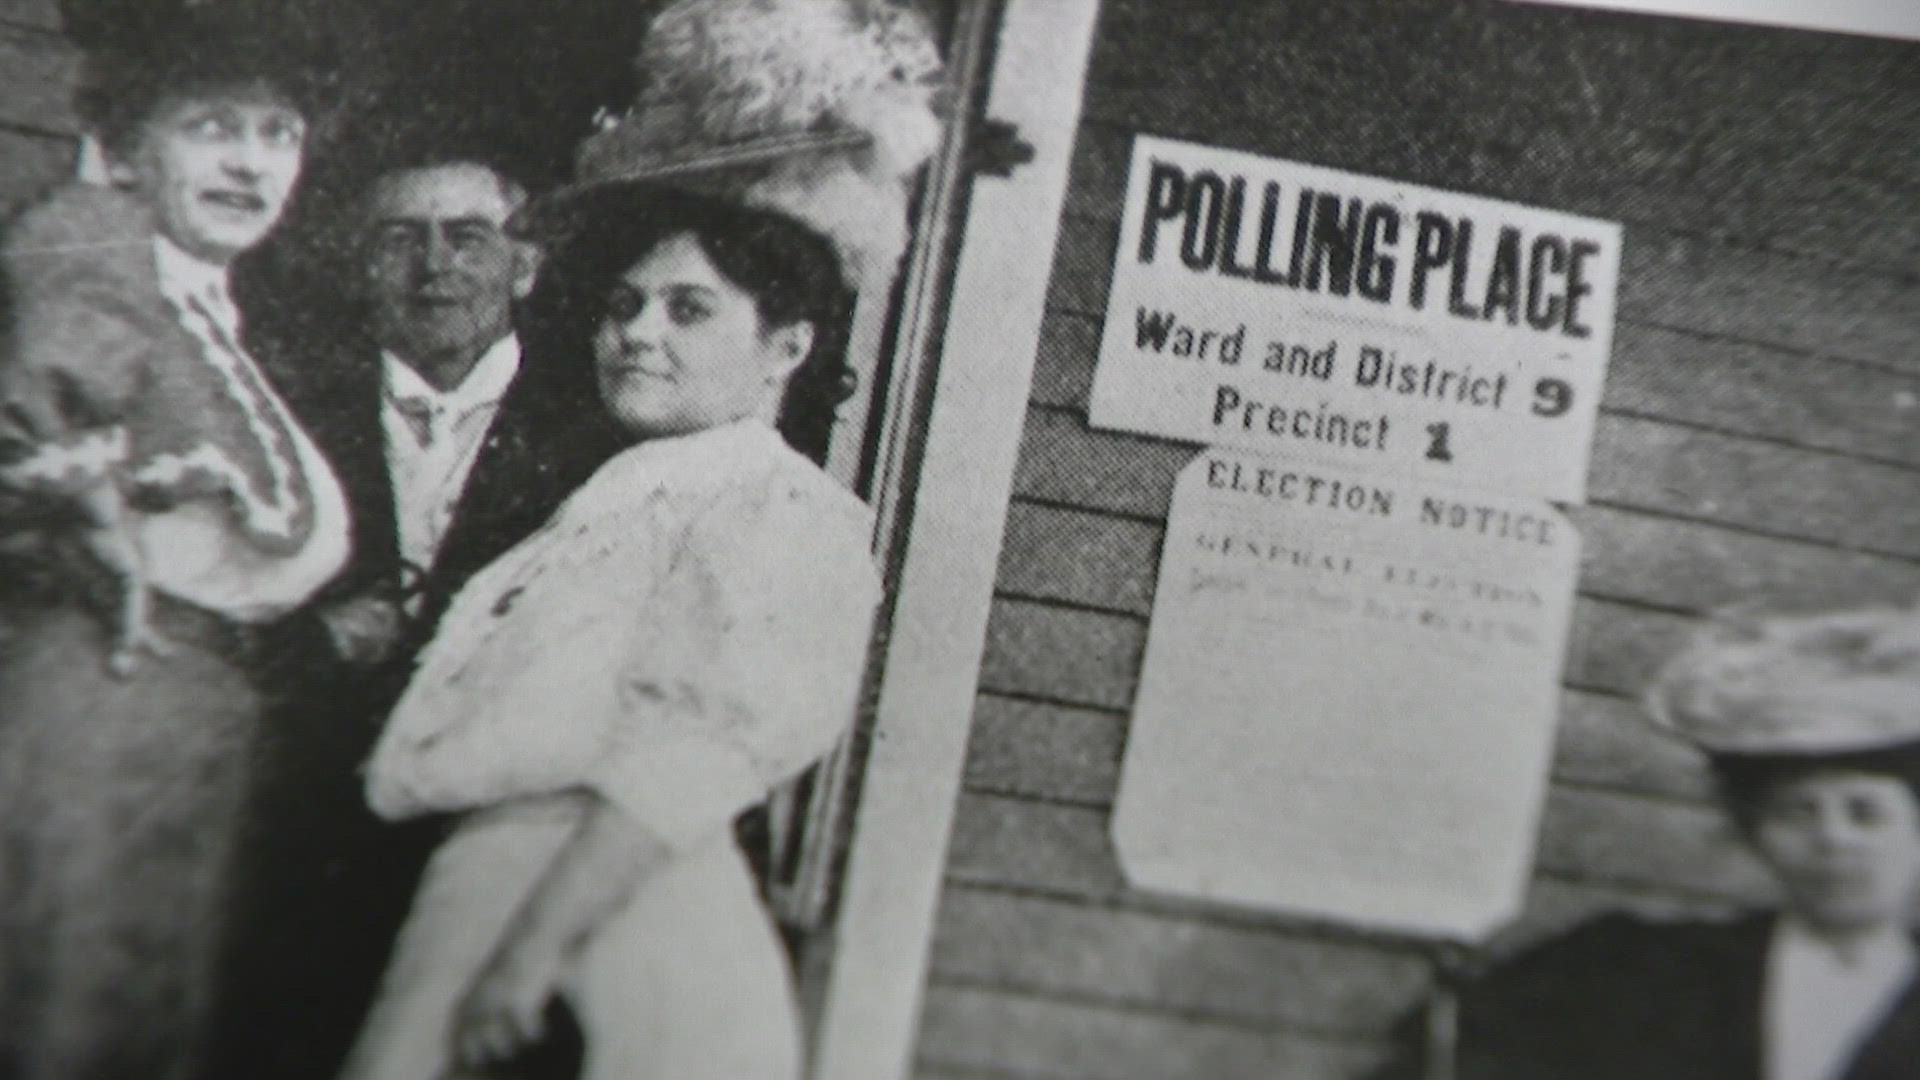 Sexism and racism played a role in women's fight for the right to vote in Colorado.